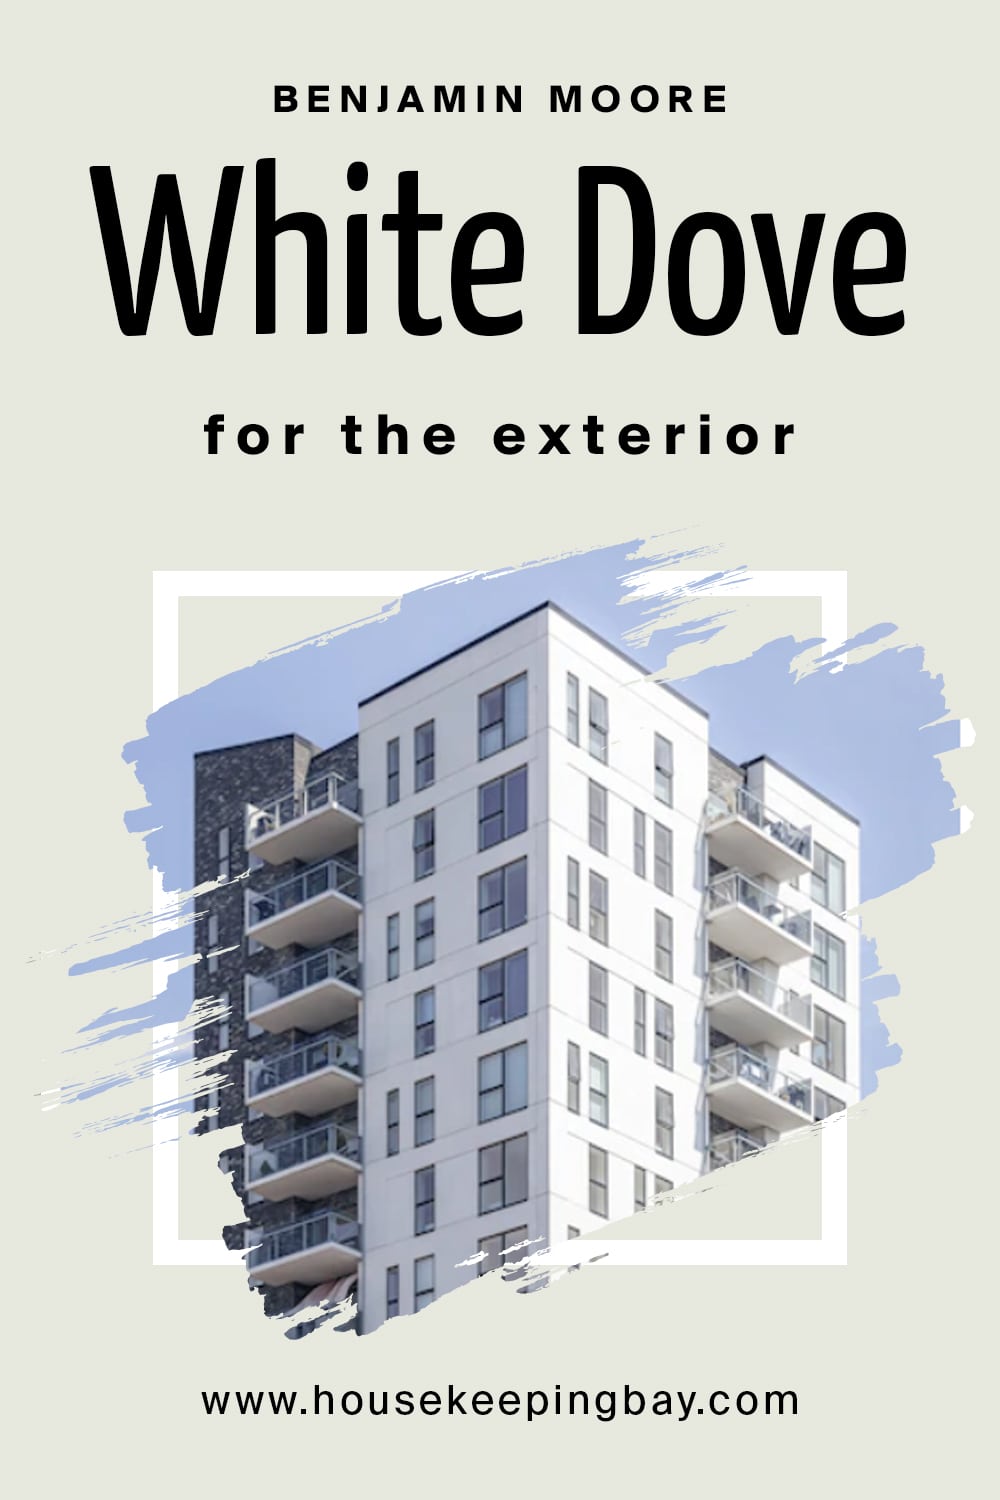 Benjamin Moore.White Dove for the exterior